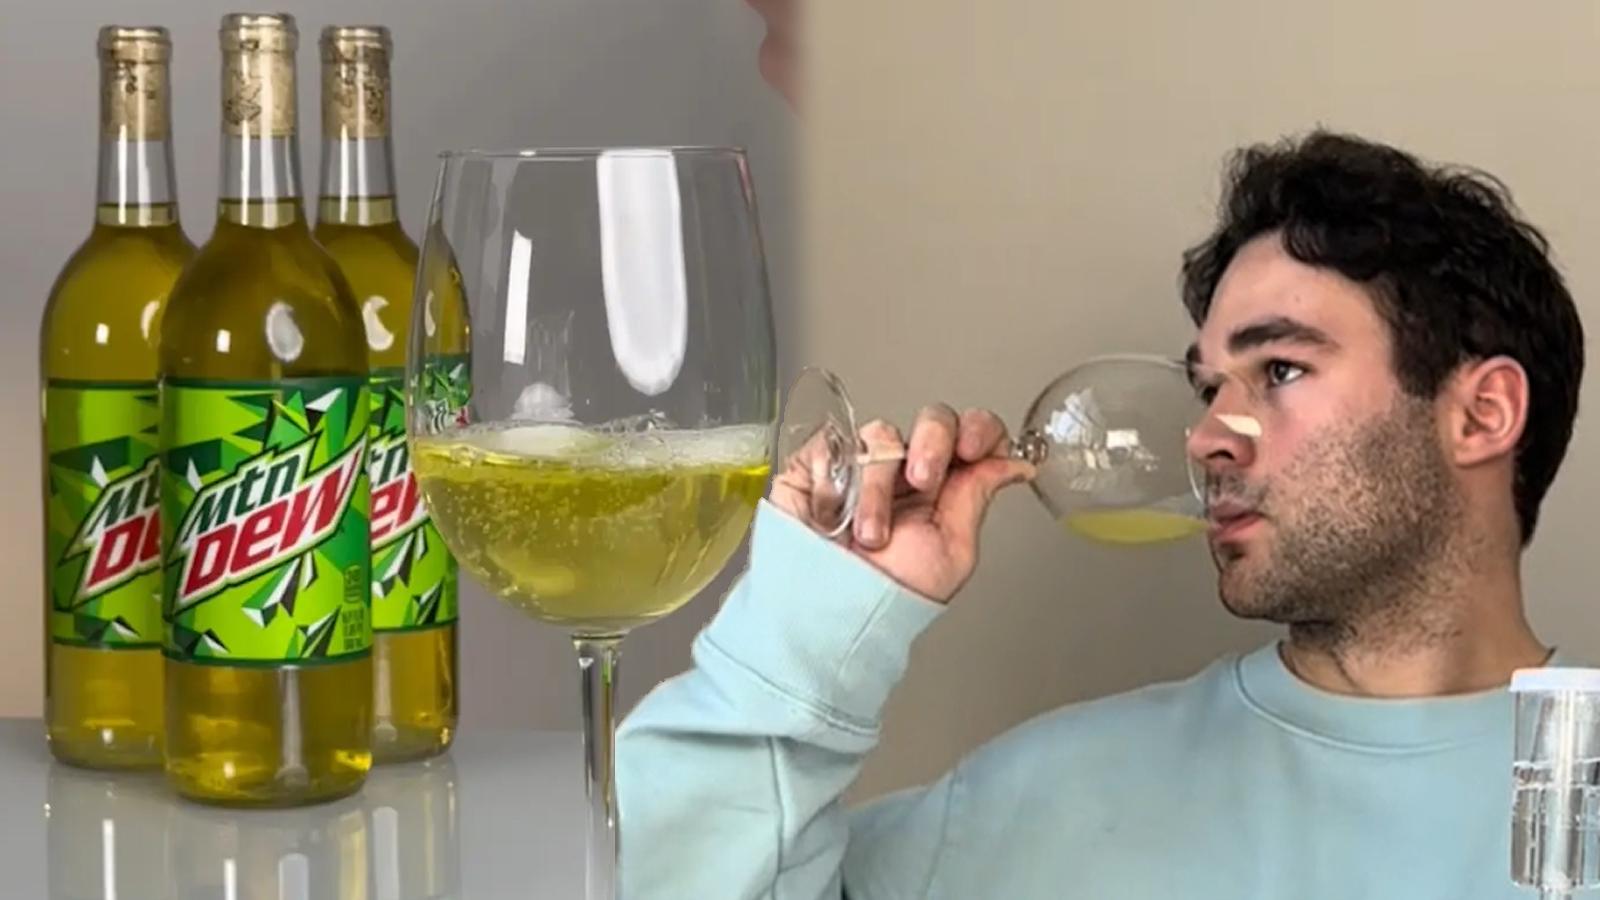 Mountain dew wine, and the creator tasting it